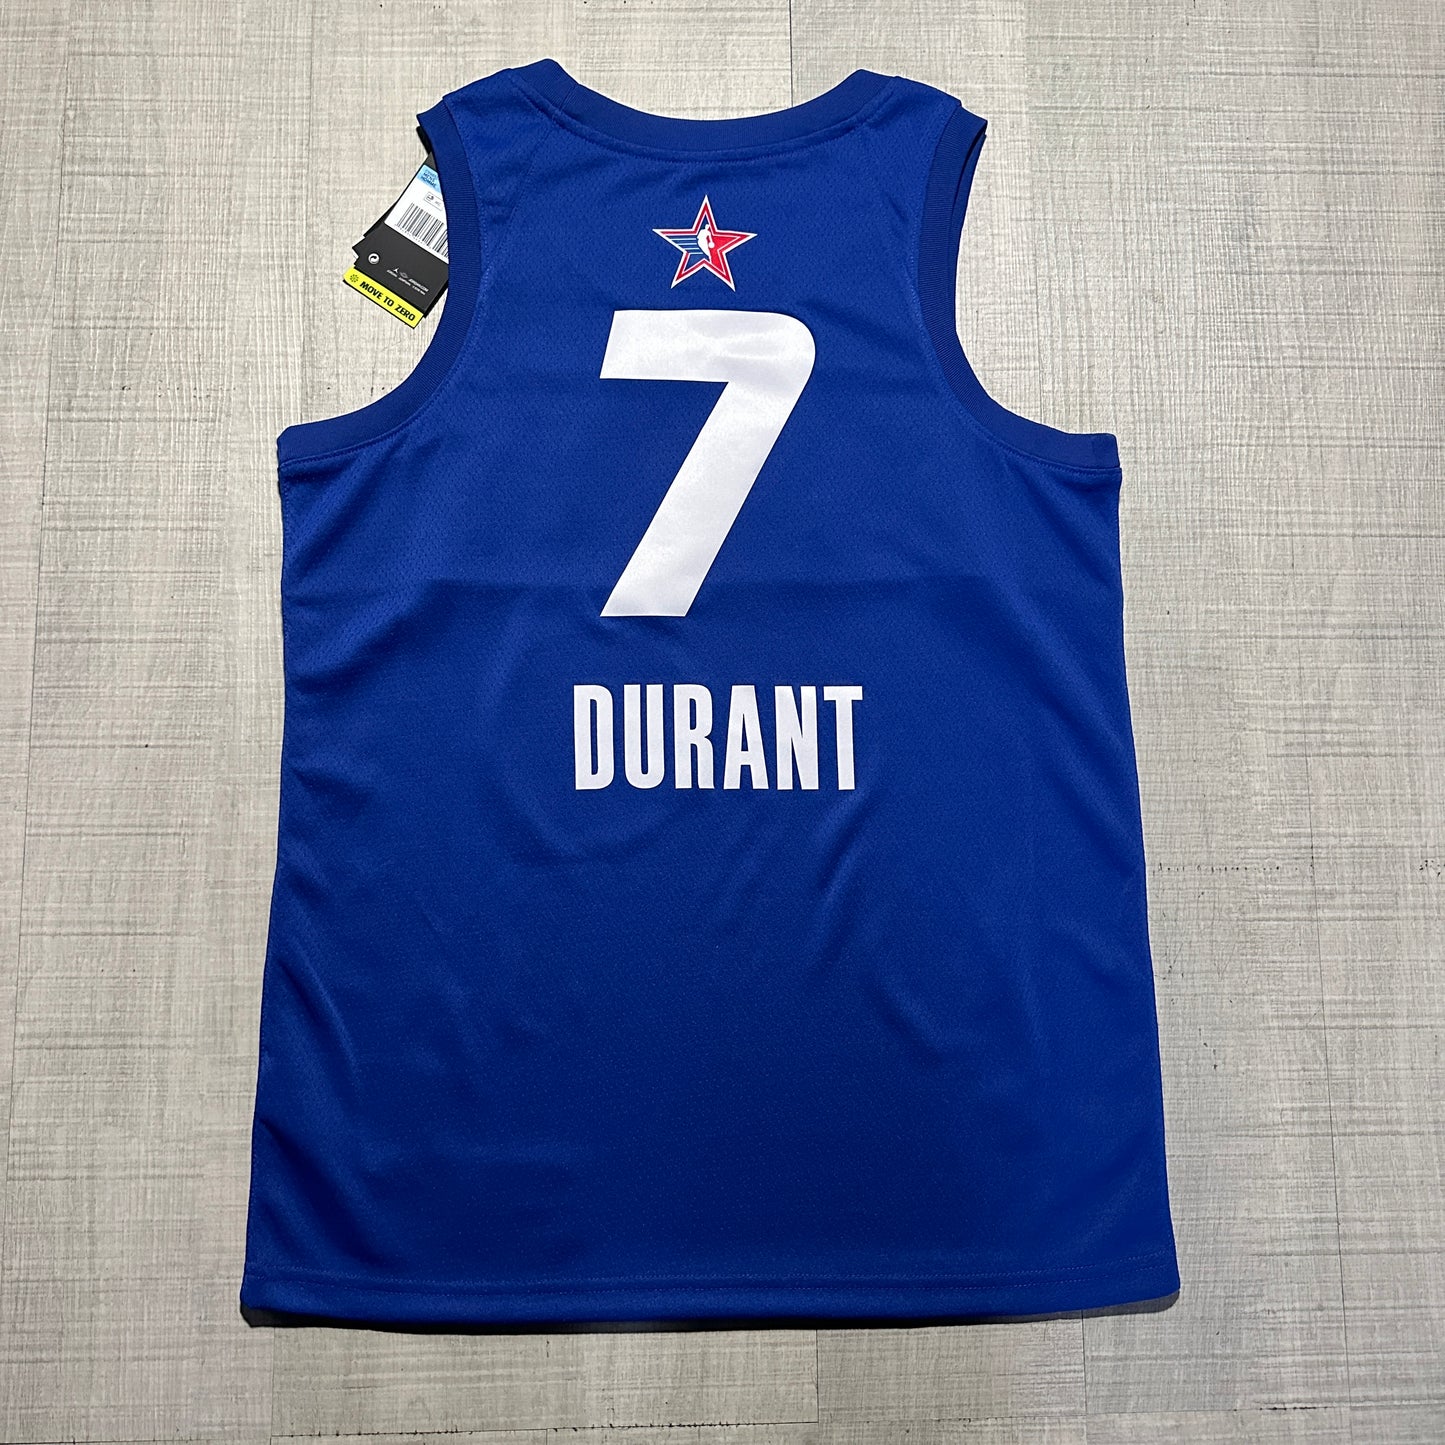 Kevin Durant All Star 2021 Nike Jersey